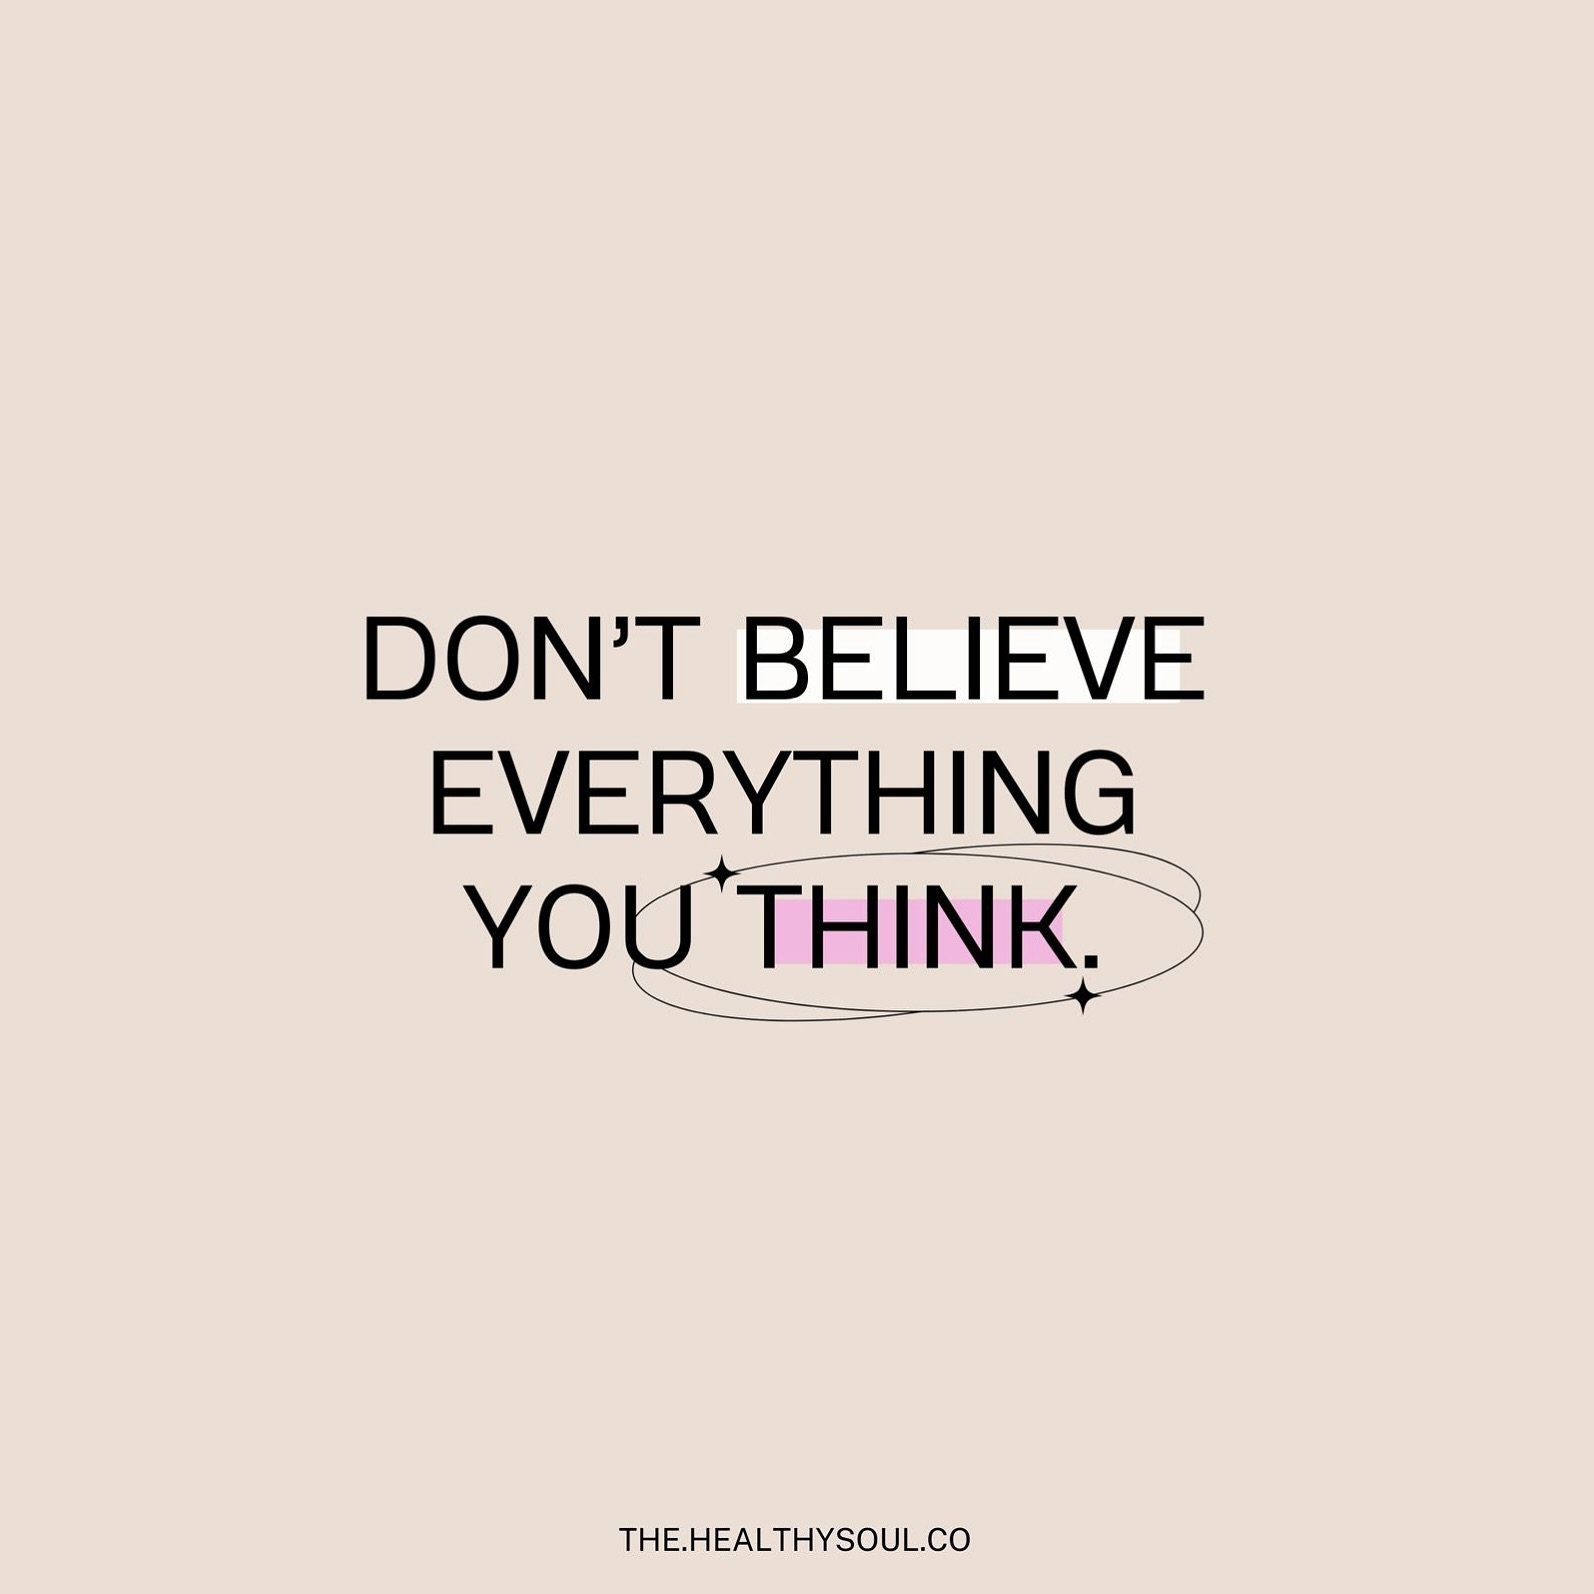 Don&rsquo;t believe everything you think!

It&rsquo;s good advice, because some thoughts are straight up trash and need vetting from our minds.

So, before you believe and agree with it.
👇🏽
Weigh it up - does it sound like the voice of God? Doe